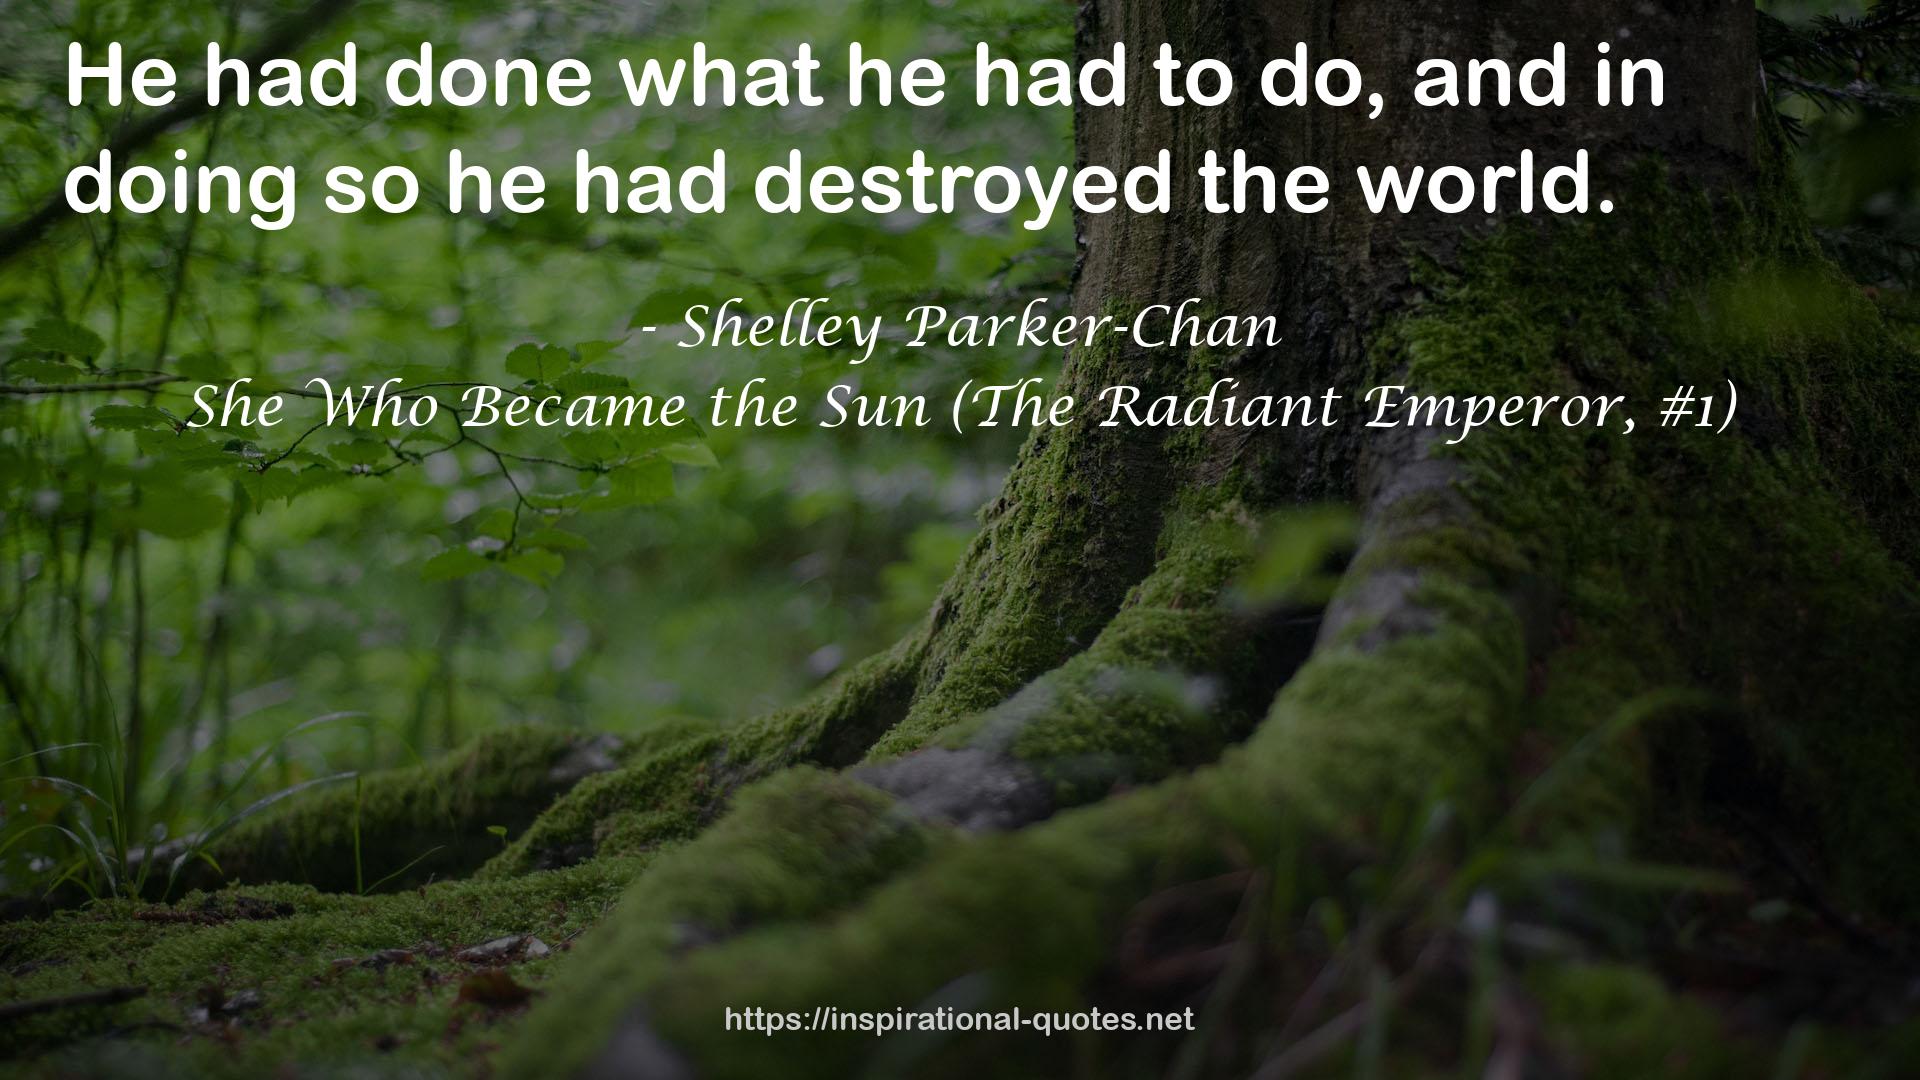 She Who Became the Sun (The Radiant Emperor, #1) QUOTES